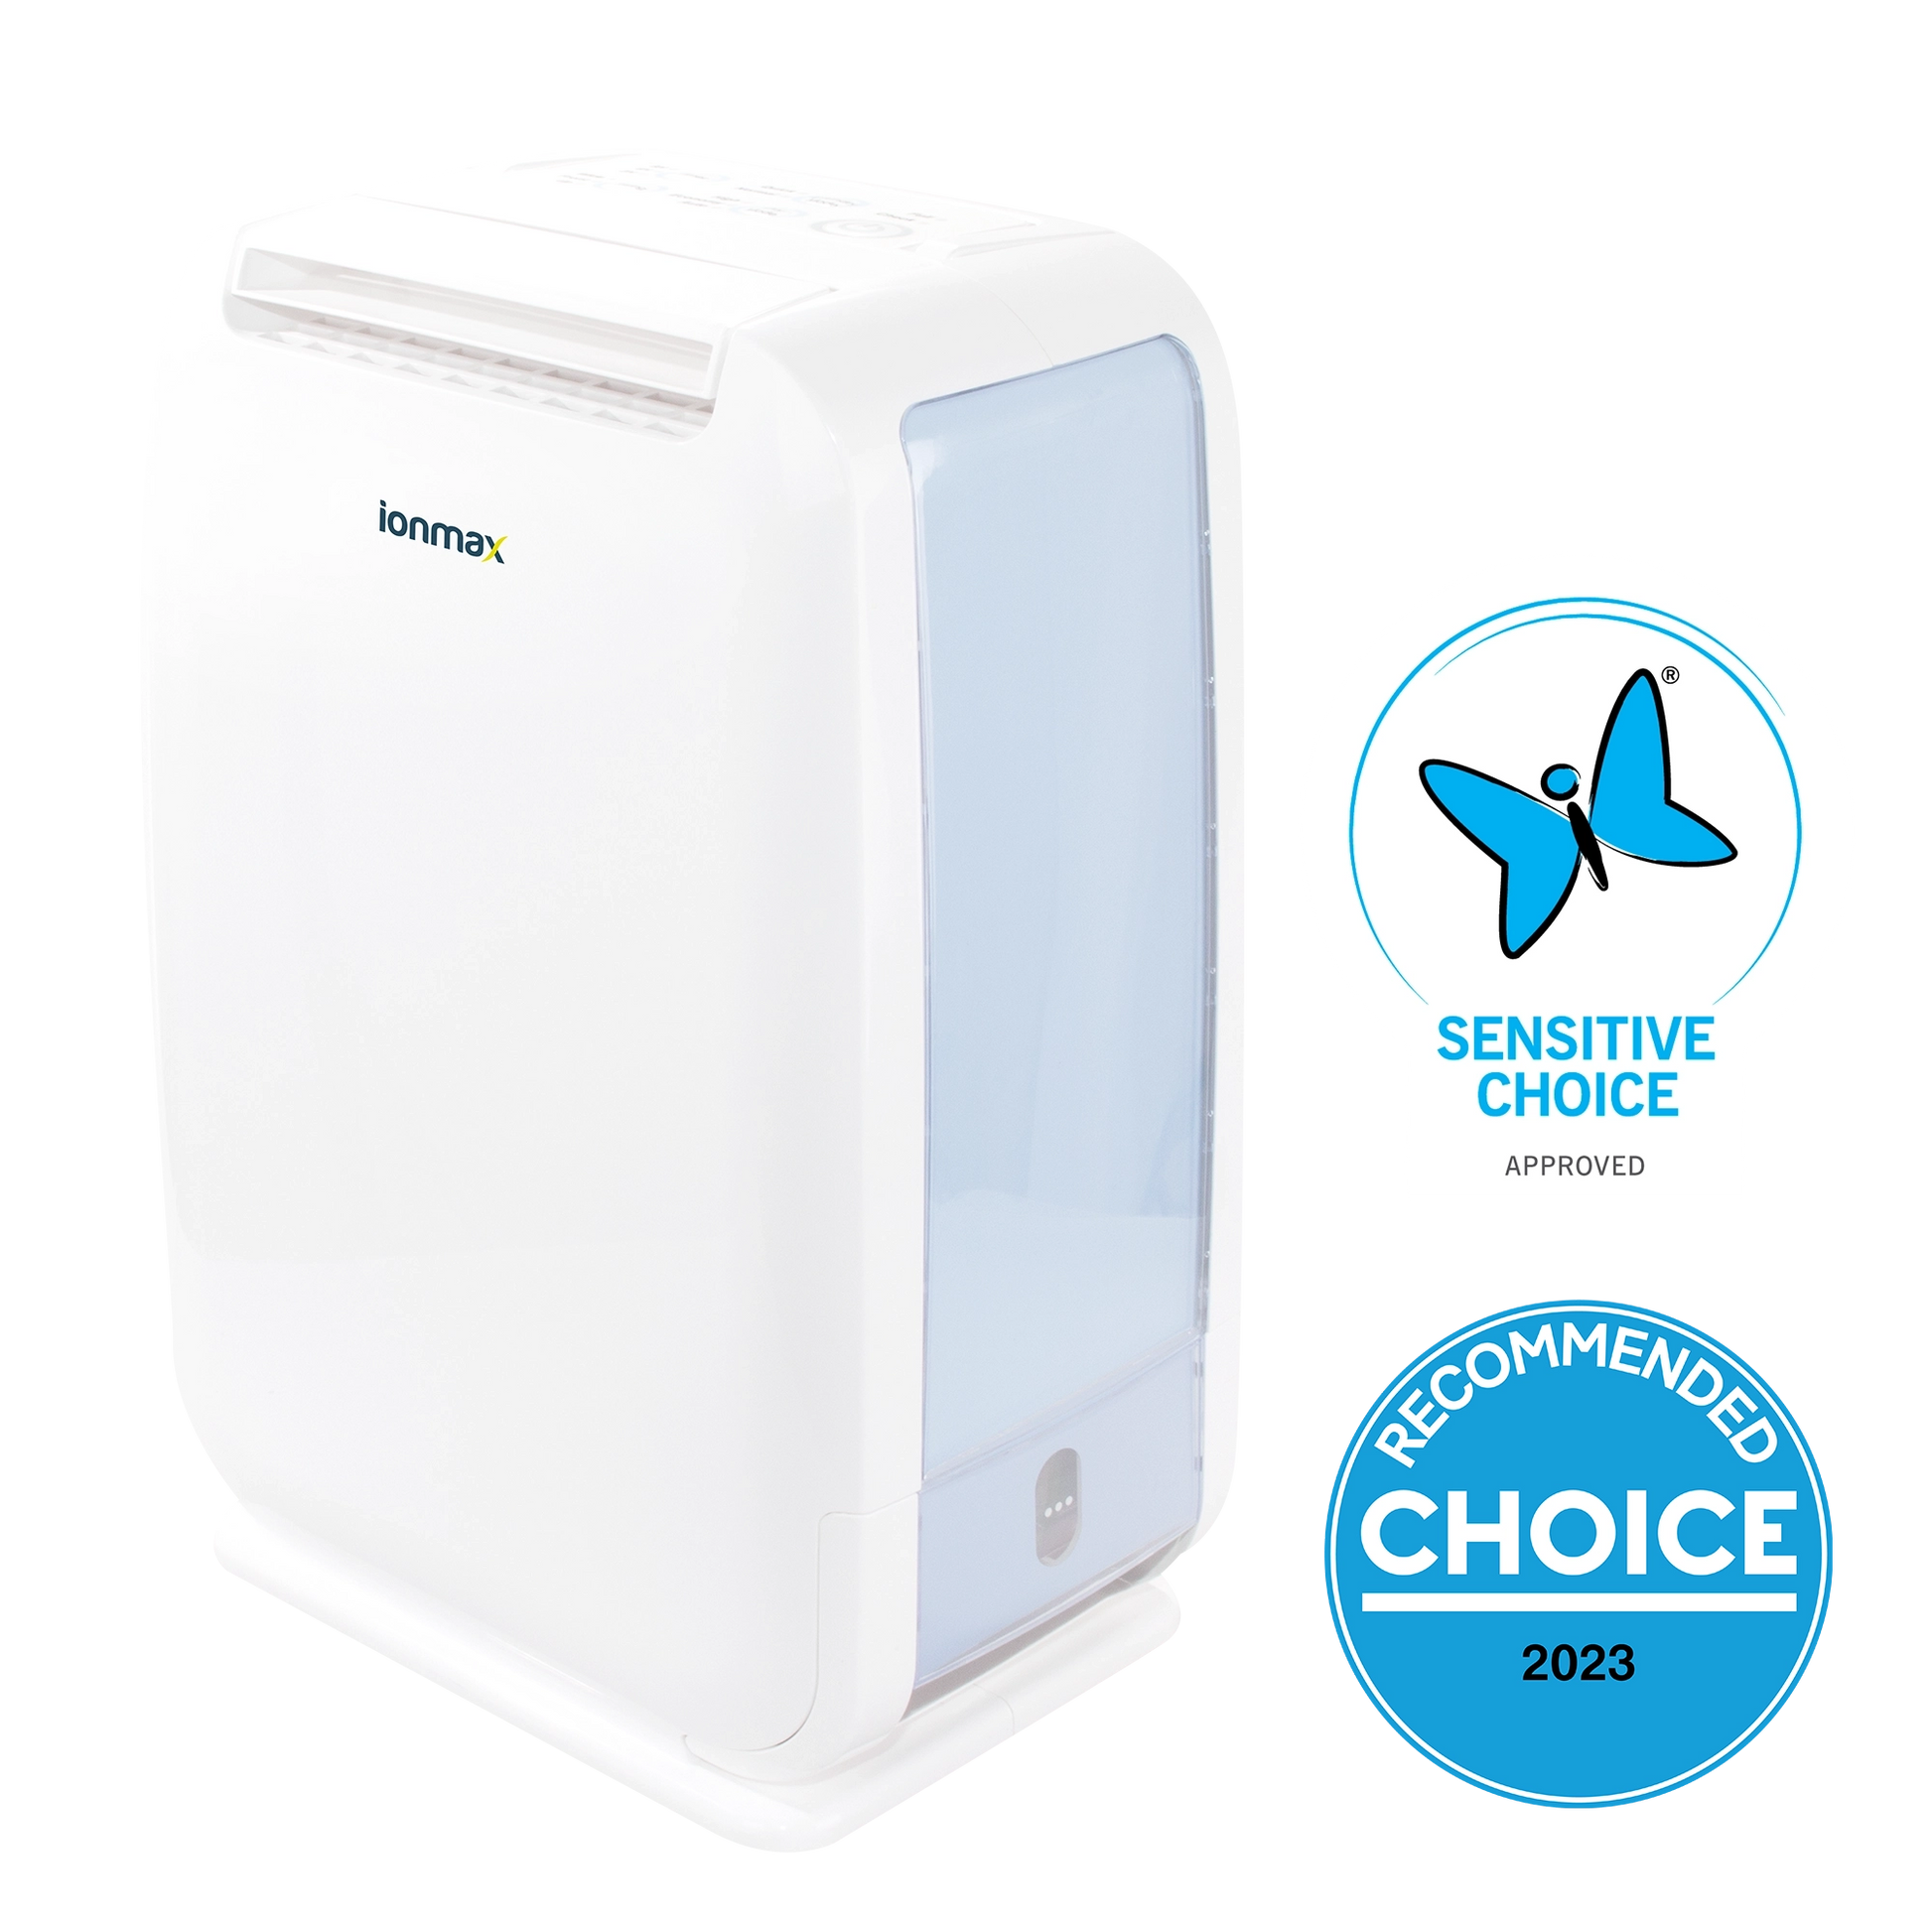 Ionmax ION610 6L/day desiccant dehumidifier - Sensitive Choice approved & Choice recommended